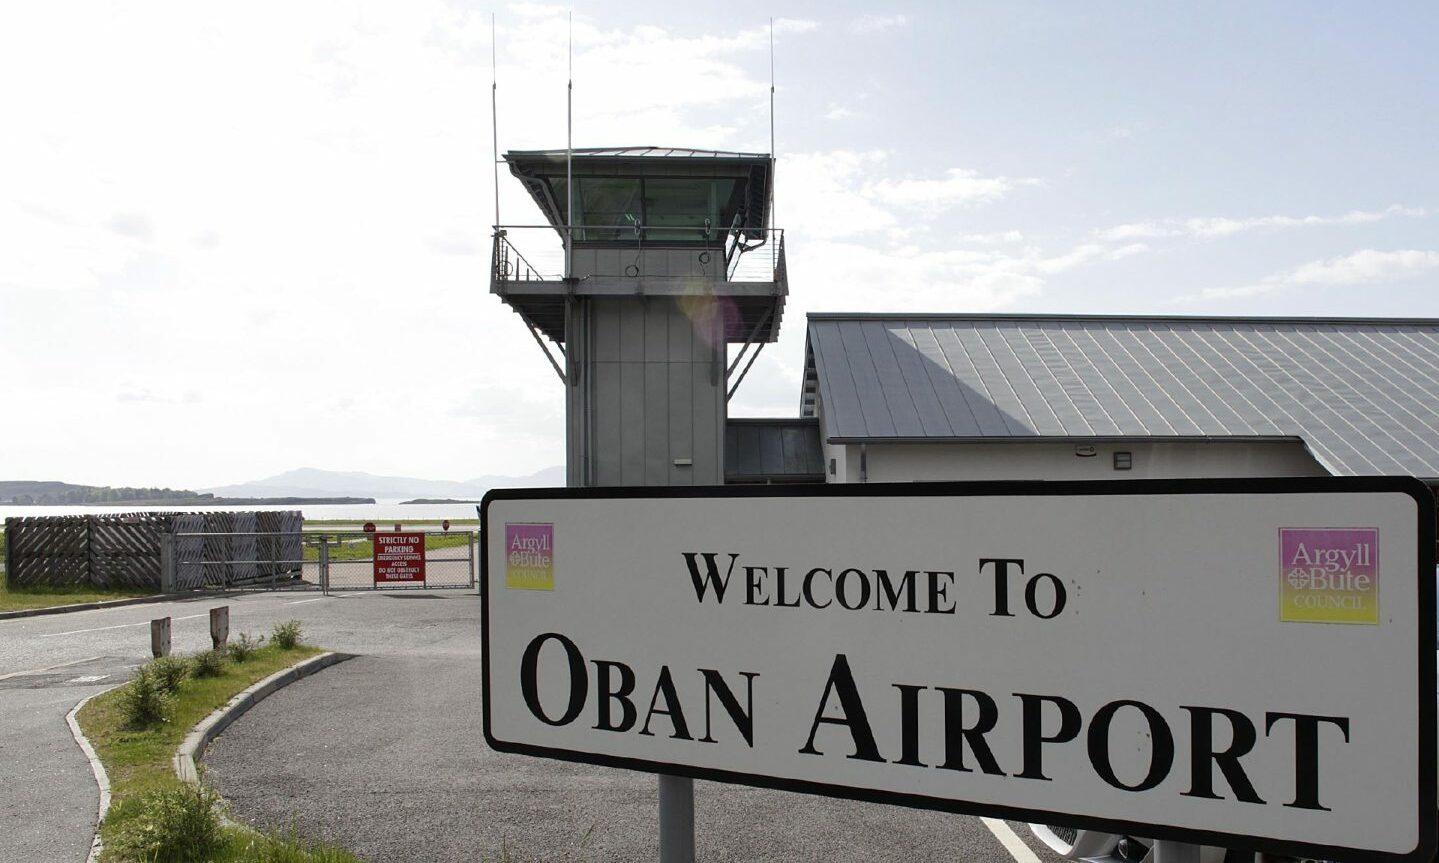 The drones will take off from Oban Airport.